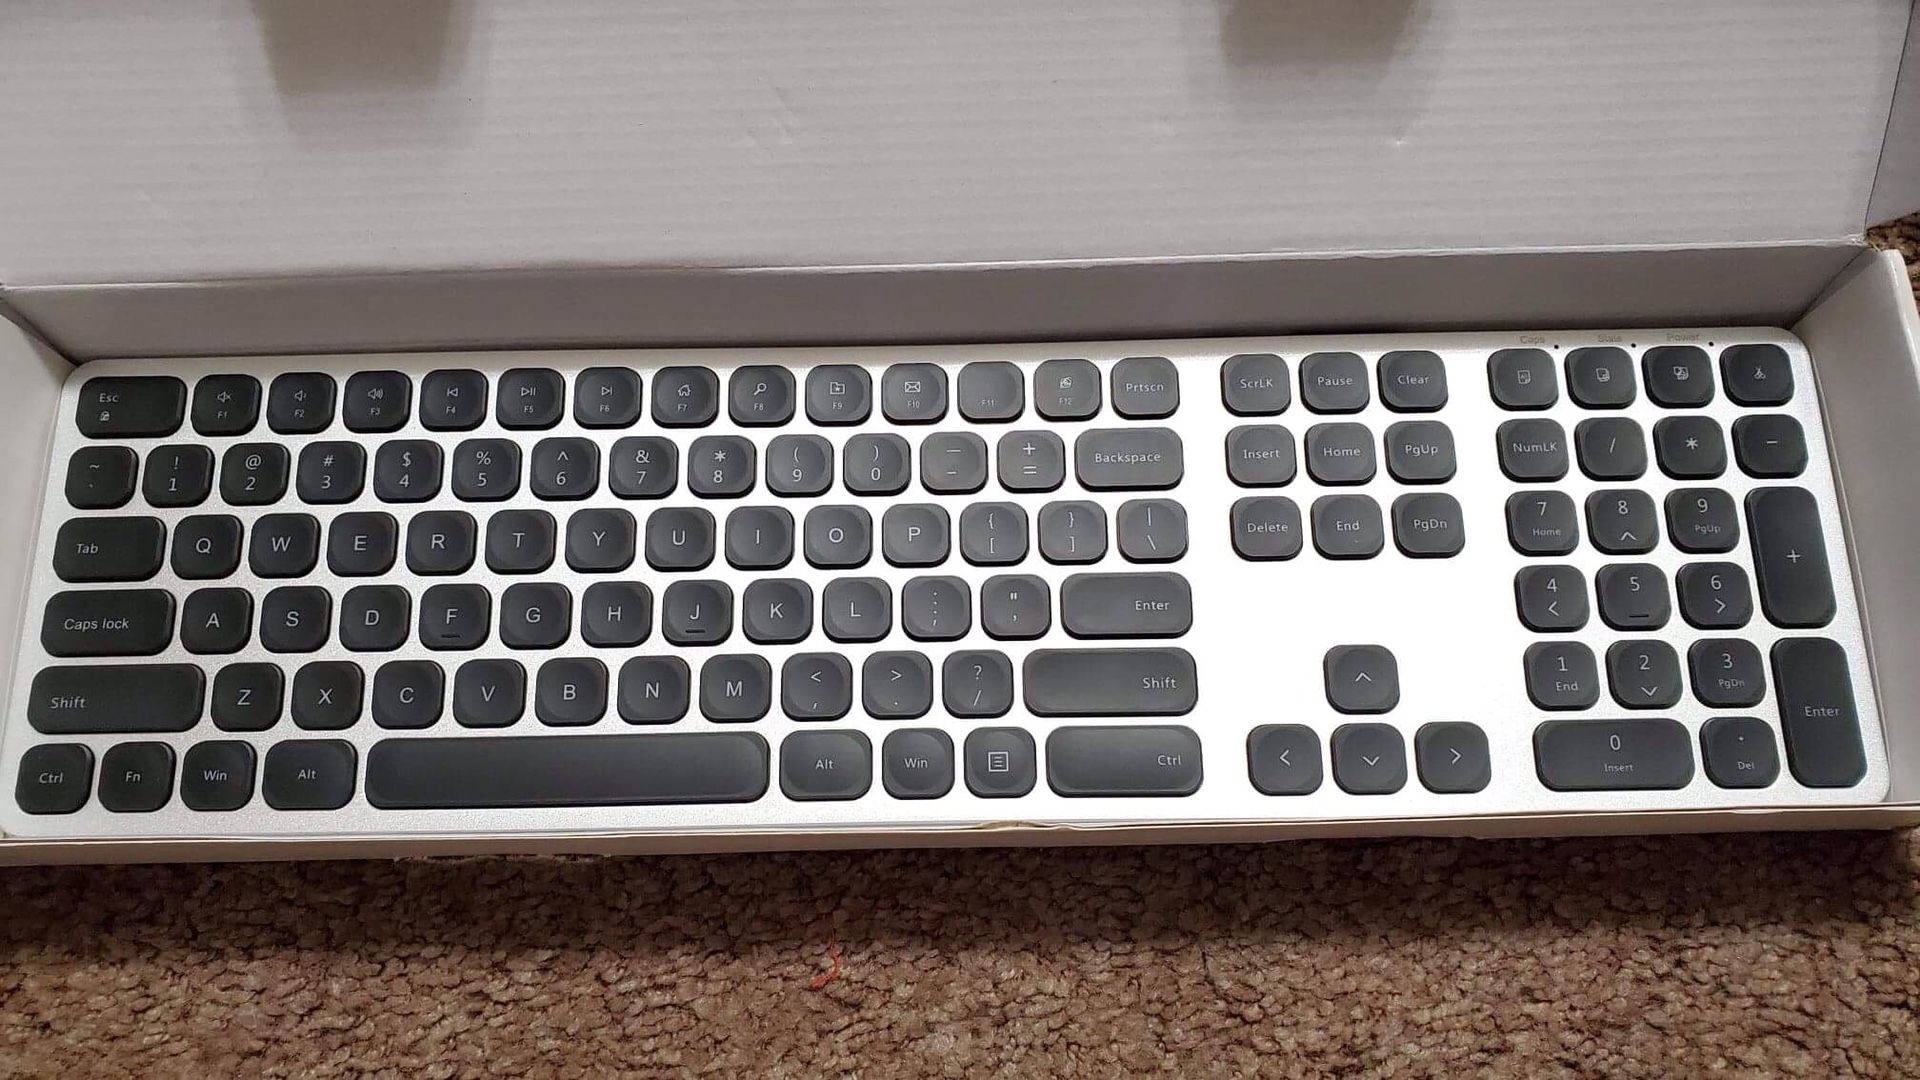 Brand new thin keyboard and wireless mouse